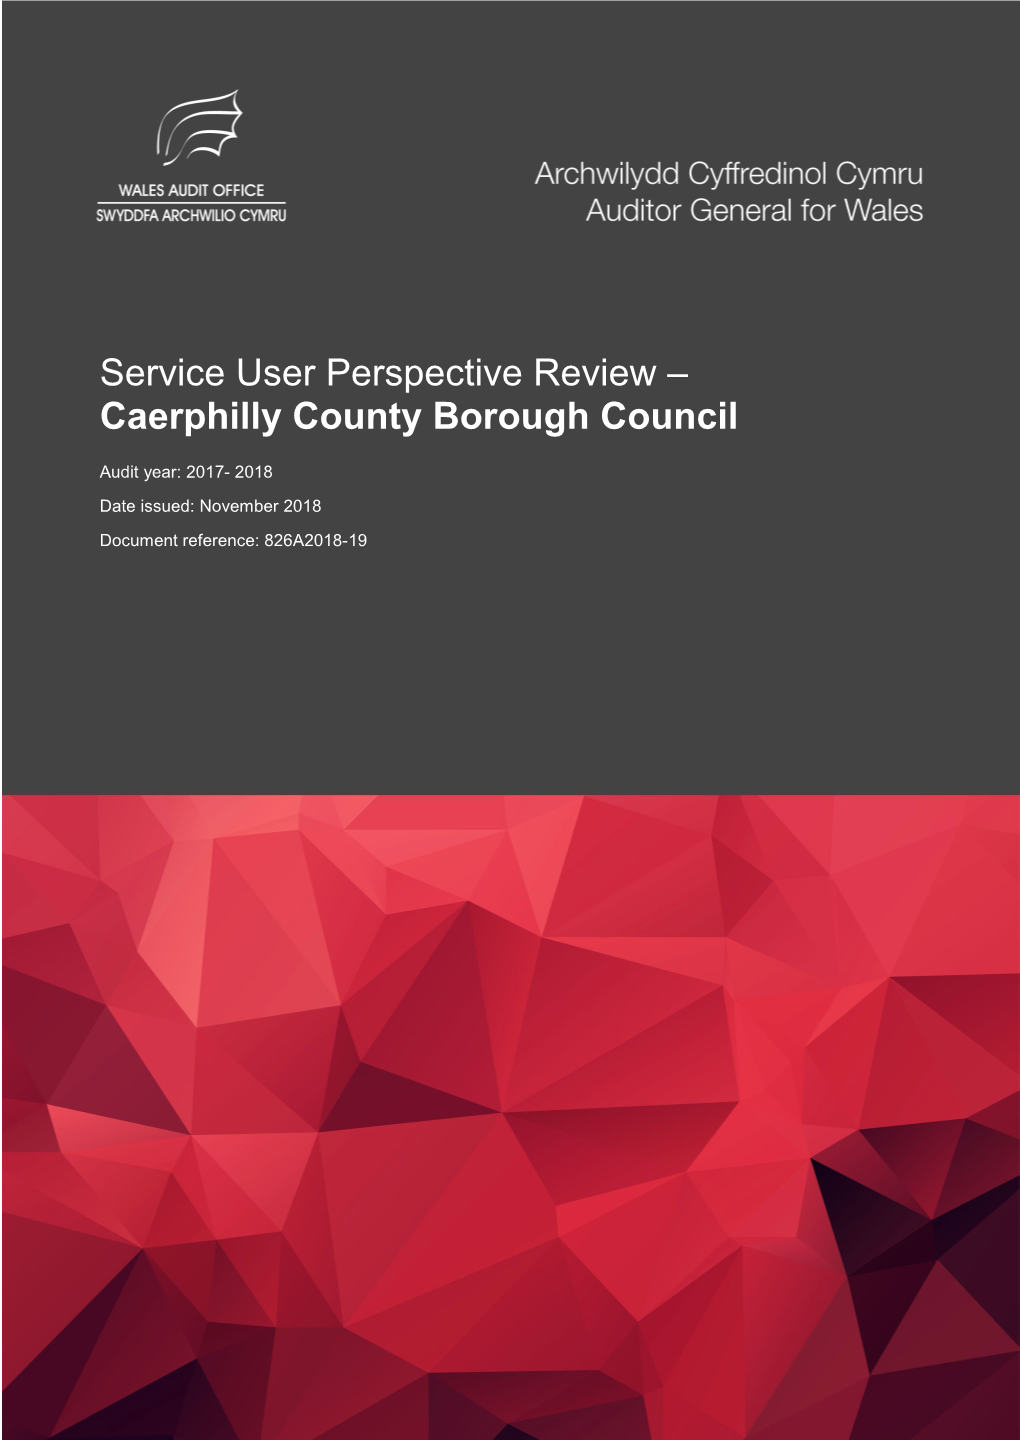 Caerphilly County Borough Council – Service User Perspective Review